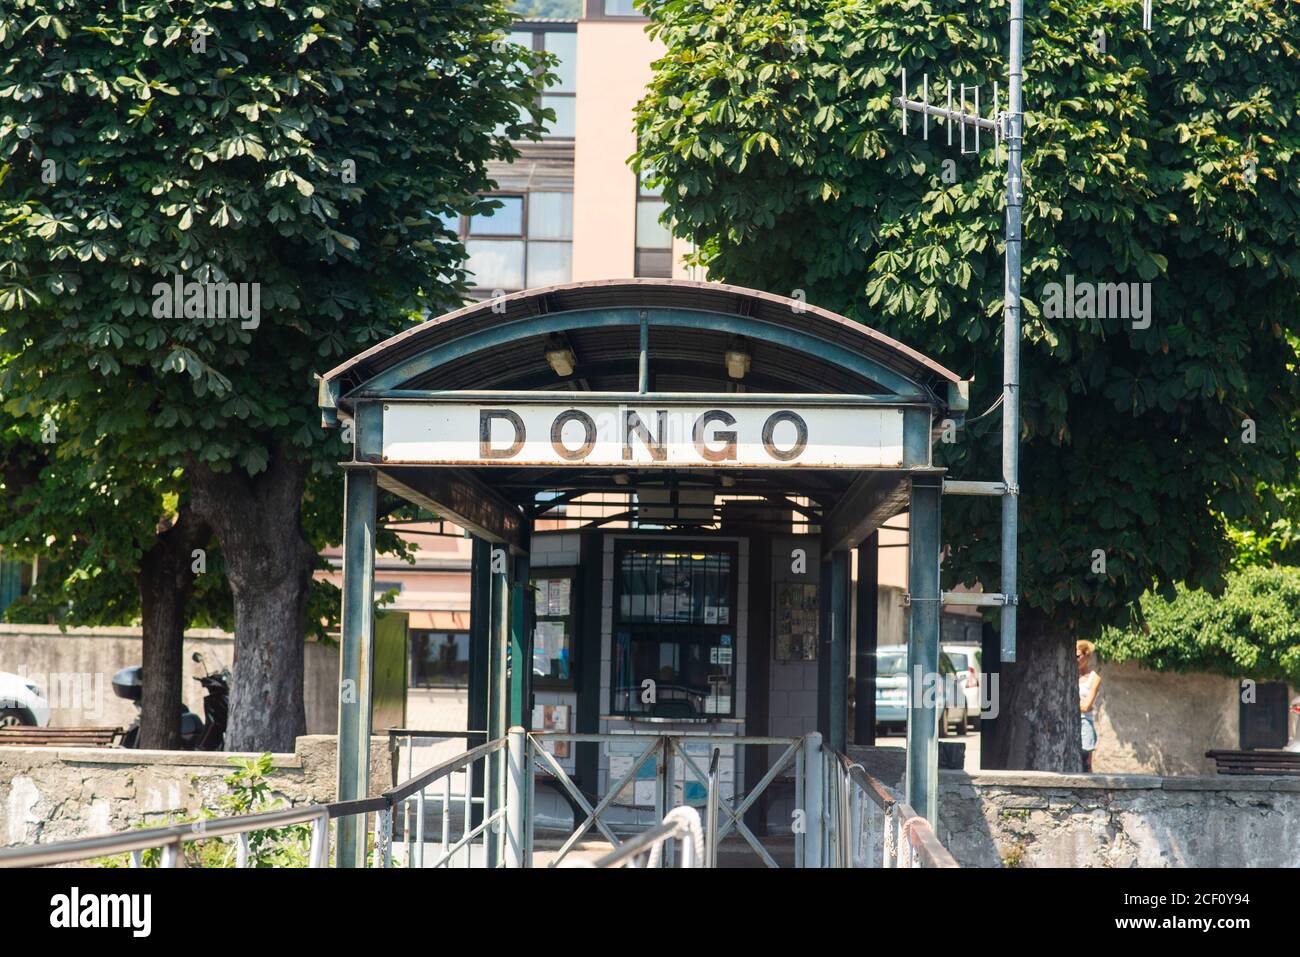 Dongo. Lake Como. Italy - July 21, 2019: Ferry Pier in the Commune of Dongo. Lombardy. Signboard with Name of the City. Stock Photo